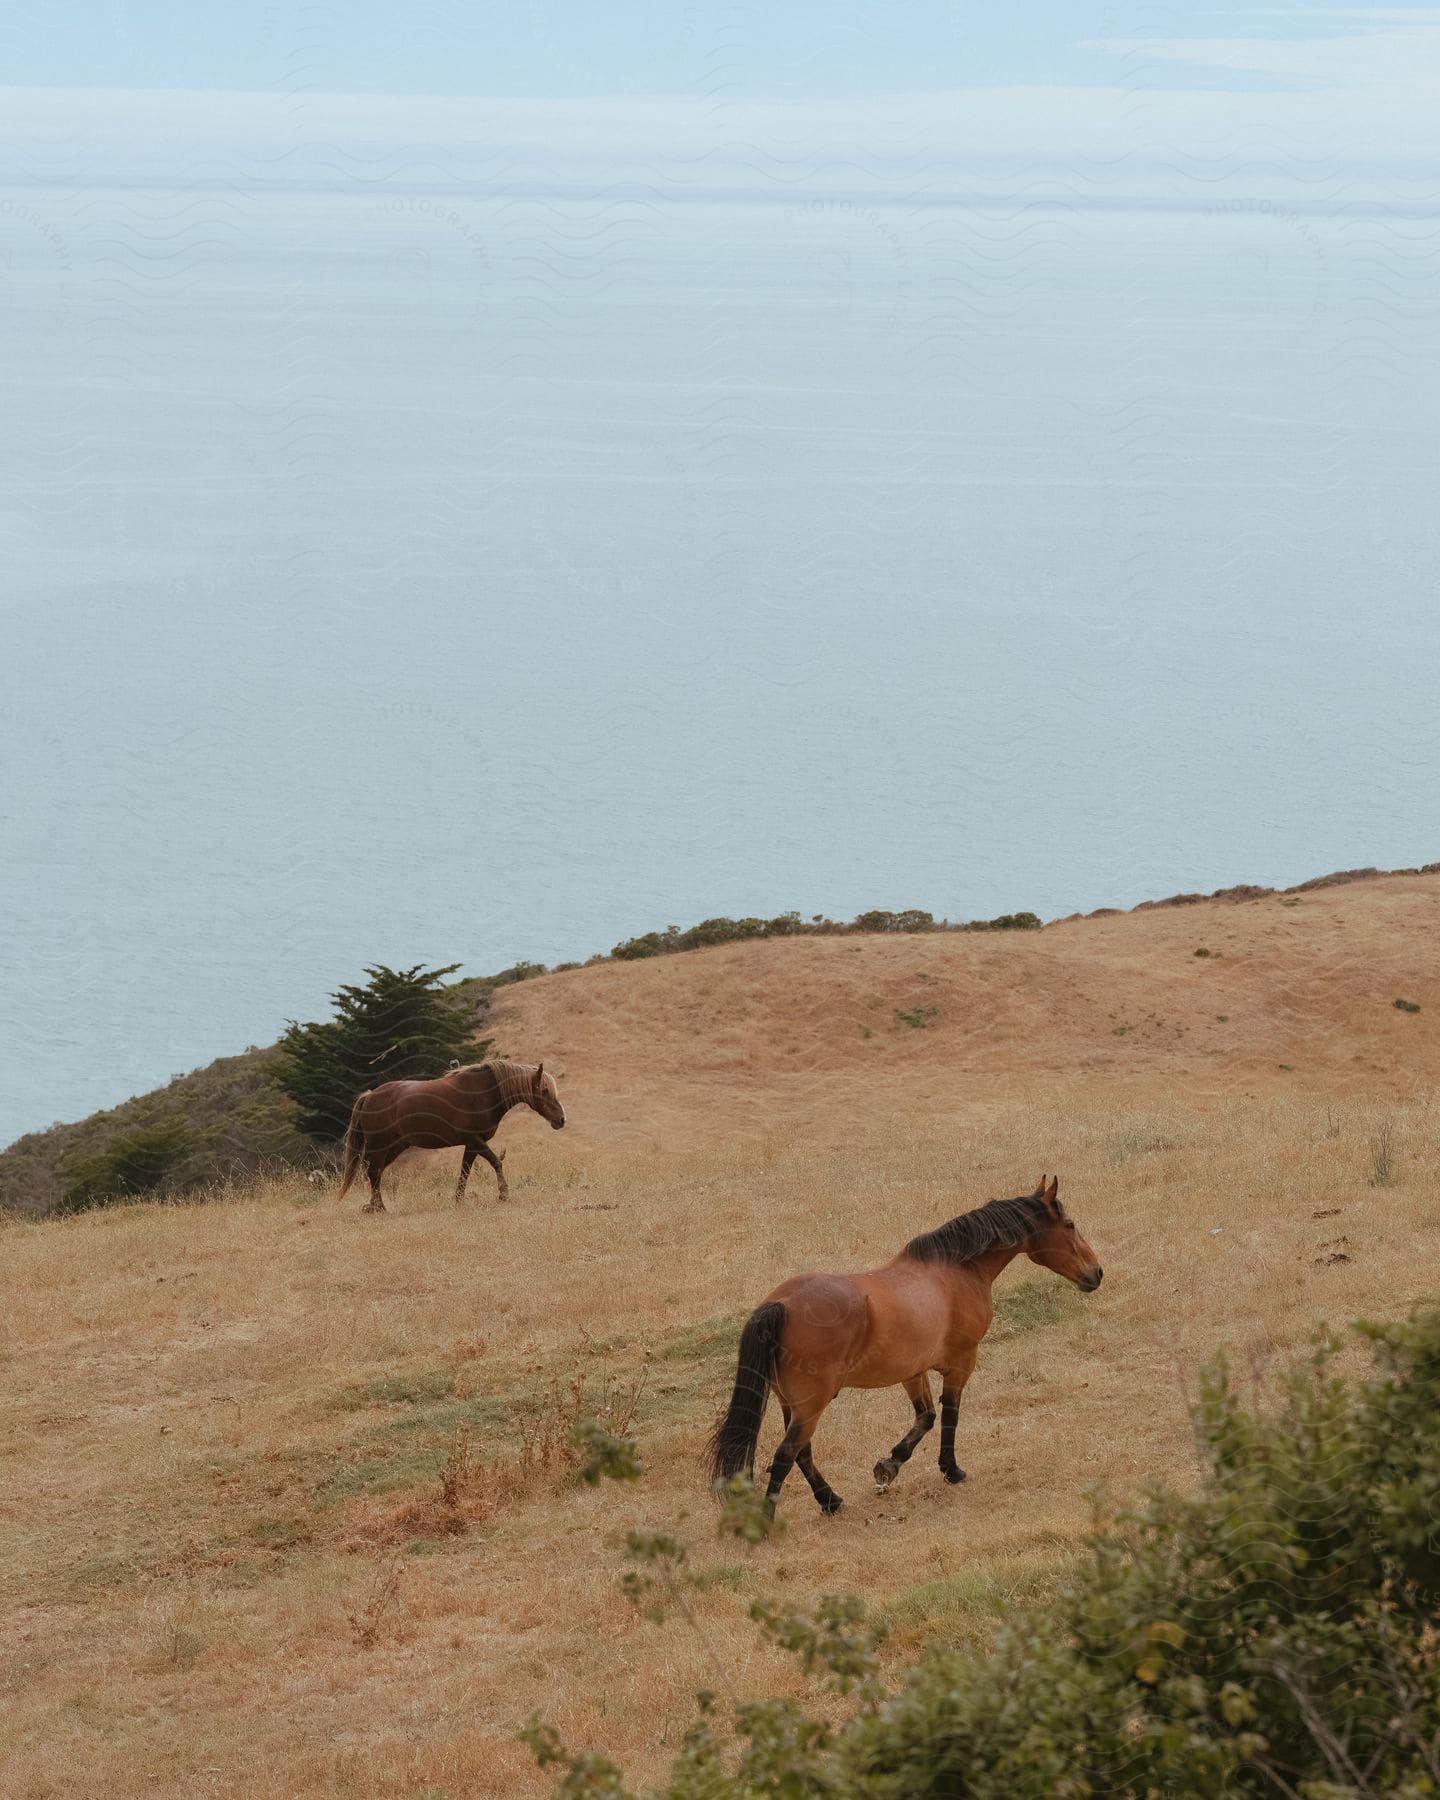 Majestic brown horses ascend uphill path with grace and determination